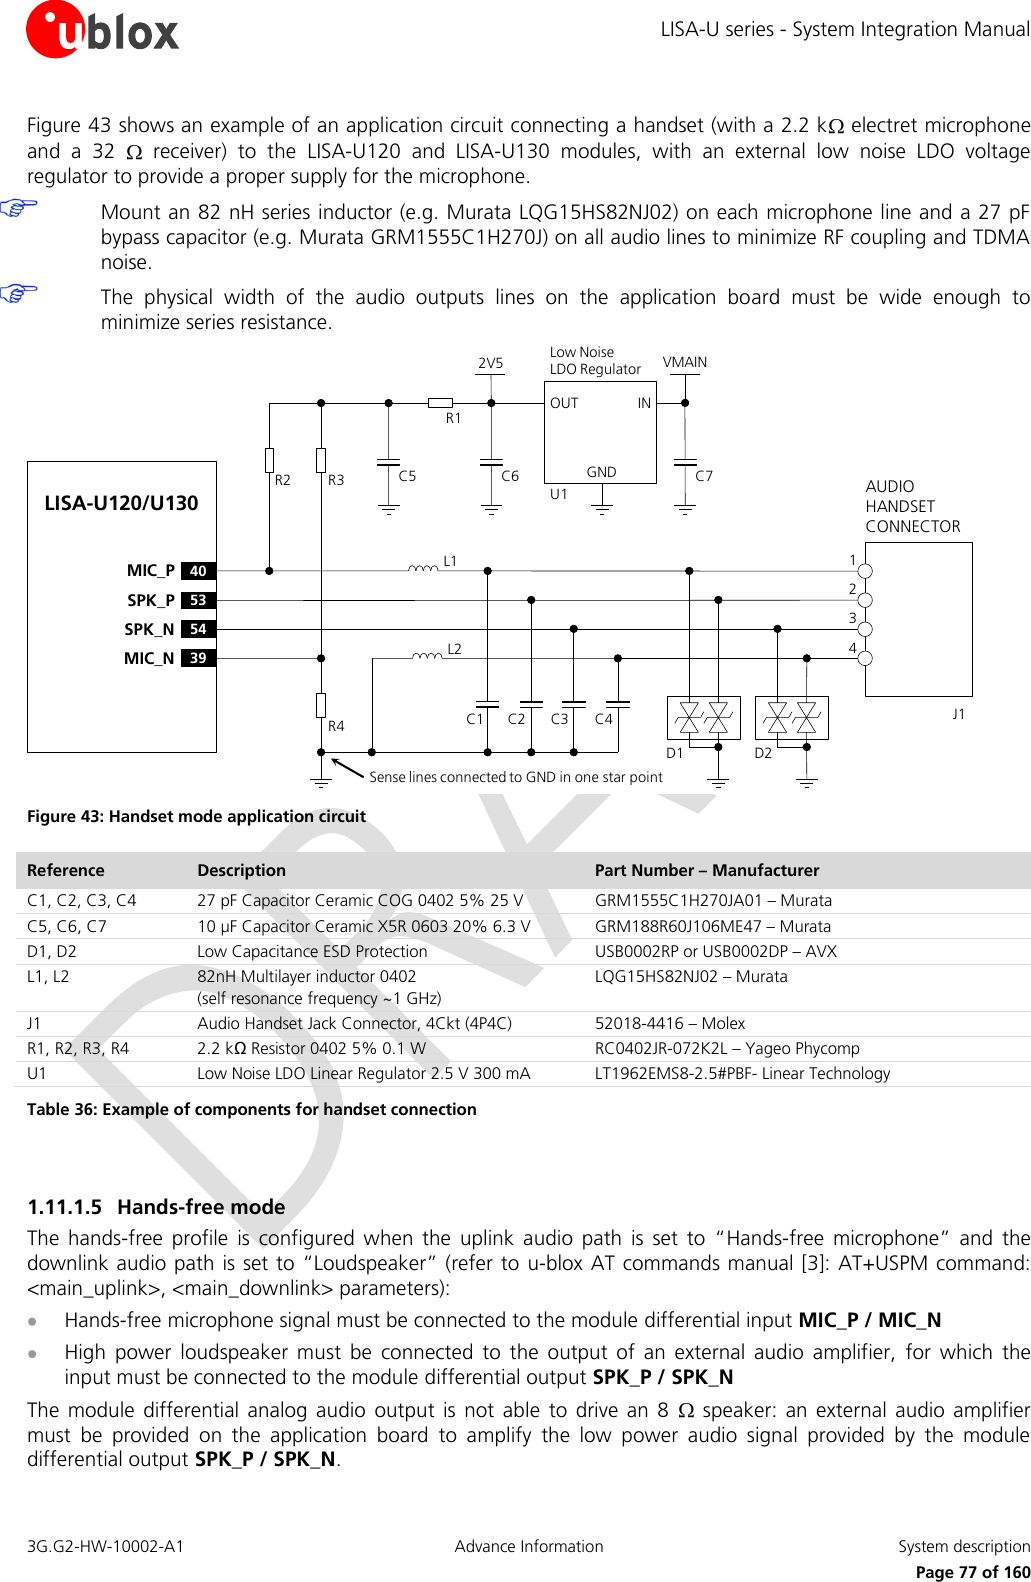 LISA-U series - System Integration Manual 3G.G2-HW-10002-A1  Advance Information  System description      Page 77 of 160 Figure 43 shows an example of an application circuit connecting a handset (with a 2.2 k  electret microphone and  a  32    receiver)  to  the  LISA-U120  and  LISA-U130  modules,  with  an  external  low  noise  LDO  voltage regulator to provide a proper supply for the microphone.  Mount an 82 nH series inductor (e.g. Murata LQG15HS82NJ02) on each microphone line and a 27 pF bypass capacitor (e.g. Murata GRM1555C1H270J) on all audio lines to minimize RF coupling and TDMA noise.  The  physical  width  of  the  audio  outputs  lines  on  the  application  board  must  be  wide  enough  to minimize series resistance. LISA-U120/U130C1 C2 C3 J14321L153SPK_P54SPK_N40MIC_P39MIC_ND1AUDIO HANDSET CONNECTORD2INOUTGNDLow Noise LDO RegulatorU1R4R1C6R3R2 C52V5Sense lines connected to GND in one star pointC4L2VMAINC7 Figure 43: Handset mode application circuit Reference Description Part Number – Manufacturer C1, C2, C3, C4 27 pF Capacitor Ceramic COG 0402 5% 25 V  GRM1555C1H270JA01 – Murata C5, C6, C7 10 µF Capacitor Ceramic X5R 0603 20% 6.3 V GRM188R60J106ME47 – Murata D1, D2 Low Capacitance ESD Protection USB0002RP or USB0002DP – AVX L1, L2 82nH Multilayer inductor 0402 (self resonance frequency ~1 GHz) LQG15HS82NJ02 – Murata J1 Audio Handset Jack Connector, 4Ckt (4P4C) 52018-4416 – Molex  R1, R2, R3, R4 2.2 kΩ Resistor 0402 5% 0.1 W  RC0402JR-072K2L – Yageo Phycomp U1 Low Noise LDO Linear Regulator 2.5 V 300 mA LT1962EMS8-2.5#PBF- Linear Technology Table 36: Example of components for handset connection  1.11.1.5 Hands-free mode The  hands-free  profile  is  configured  when  the  uplink  audio  path  is  set  to  “Hands-free  microphone”  and  the downlink audio path  is set to “Loudspeaker” (refer to  u-blox AT commands manual [3]:  AT+USPM command: &lt;main_uplink&gt;, &lt;main_downlink&gt; parameters):  Hands-free microphone signal must be connected to the module differential input MIC_P / MIC_N  High  power  loudspeaker  must  be  connected  to  the  output  of  an  external  audio  amplifier,  for  which  the input must be connected to the module differential output SPK_P / SPK_N The  module differential  analog audio  output  is  not able  to drive  an  8    speaker:  an  external  audio amplifier must  be  provided  on  the  application  board  to  amplify  the  low  power  audio  signal  provided  by  the  module differential output SPK_P / SPK_N. 